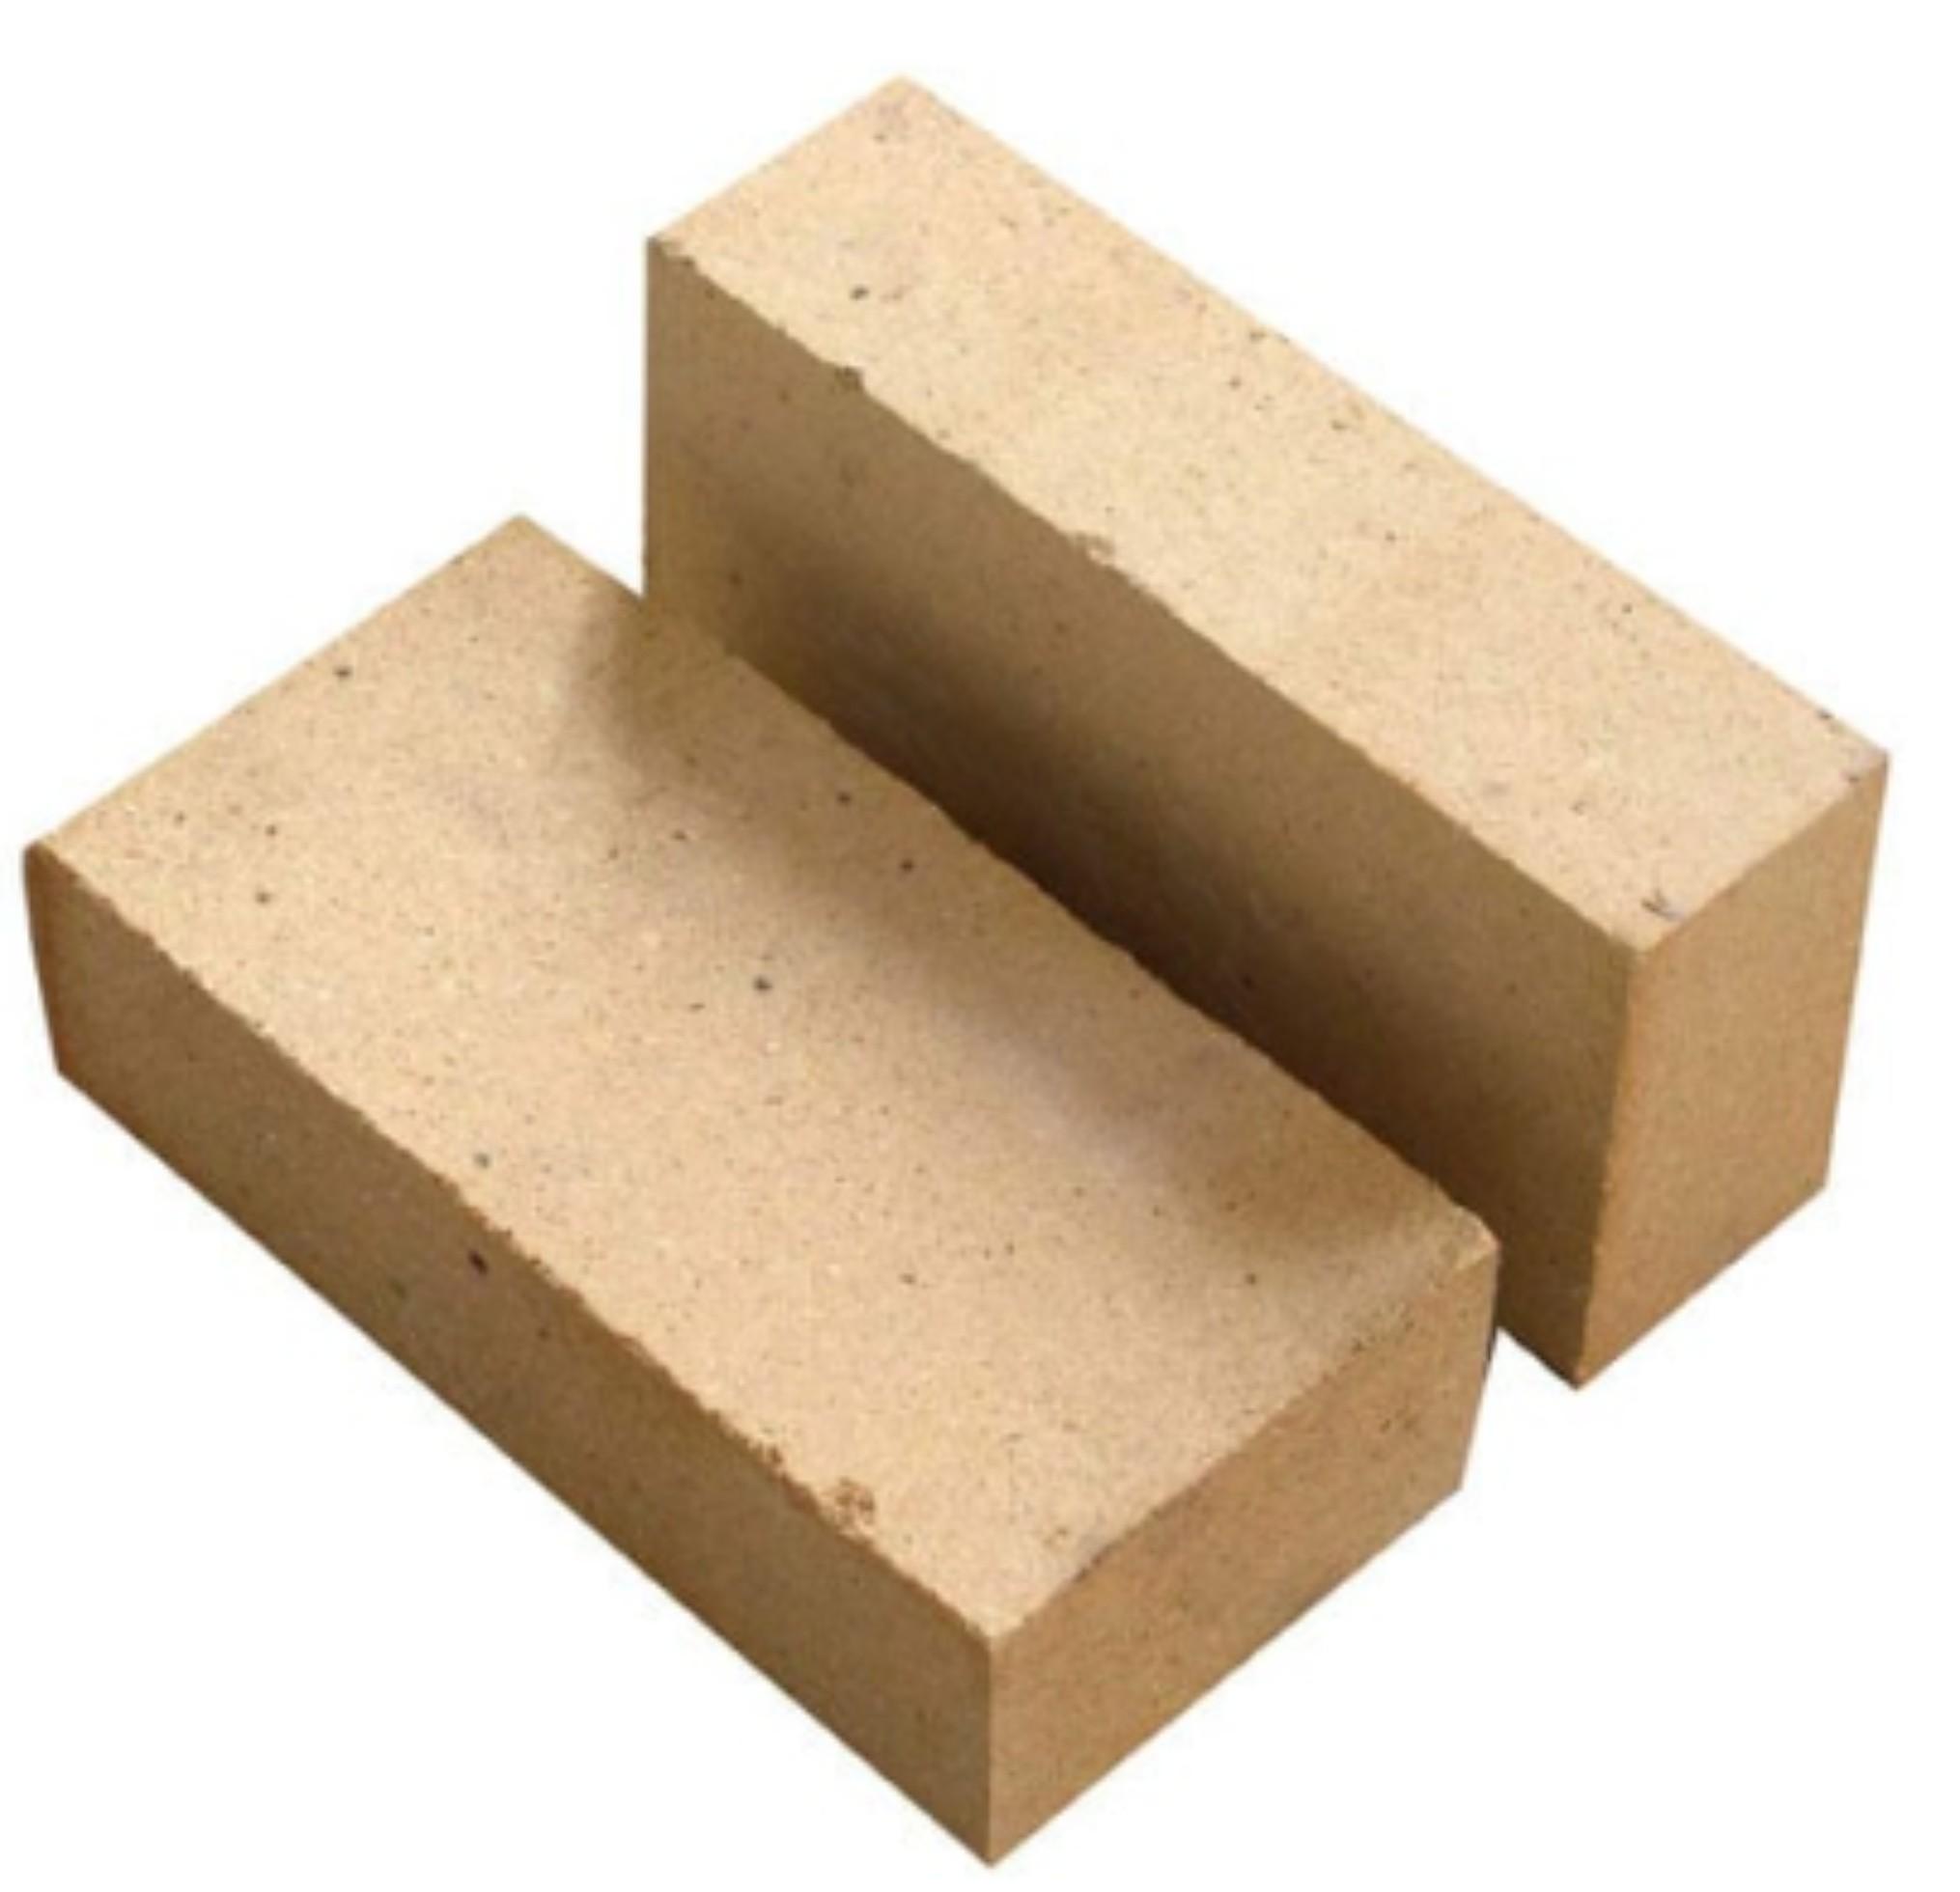 What Are Refractory Bricks and What Are They For?